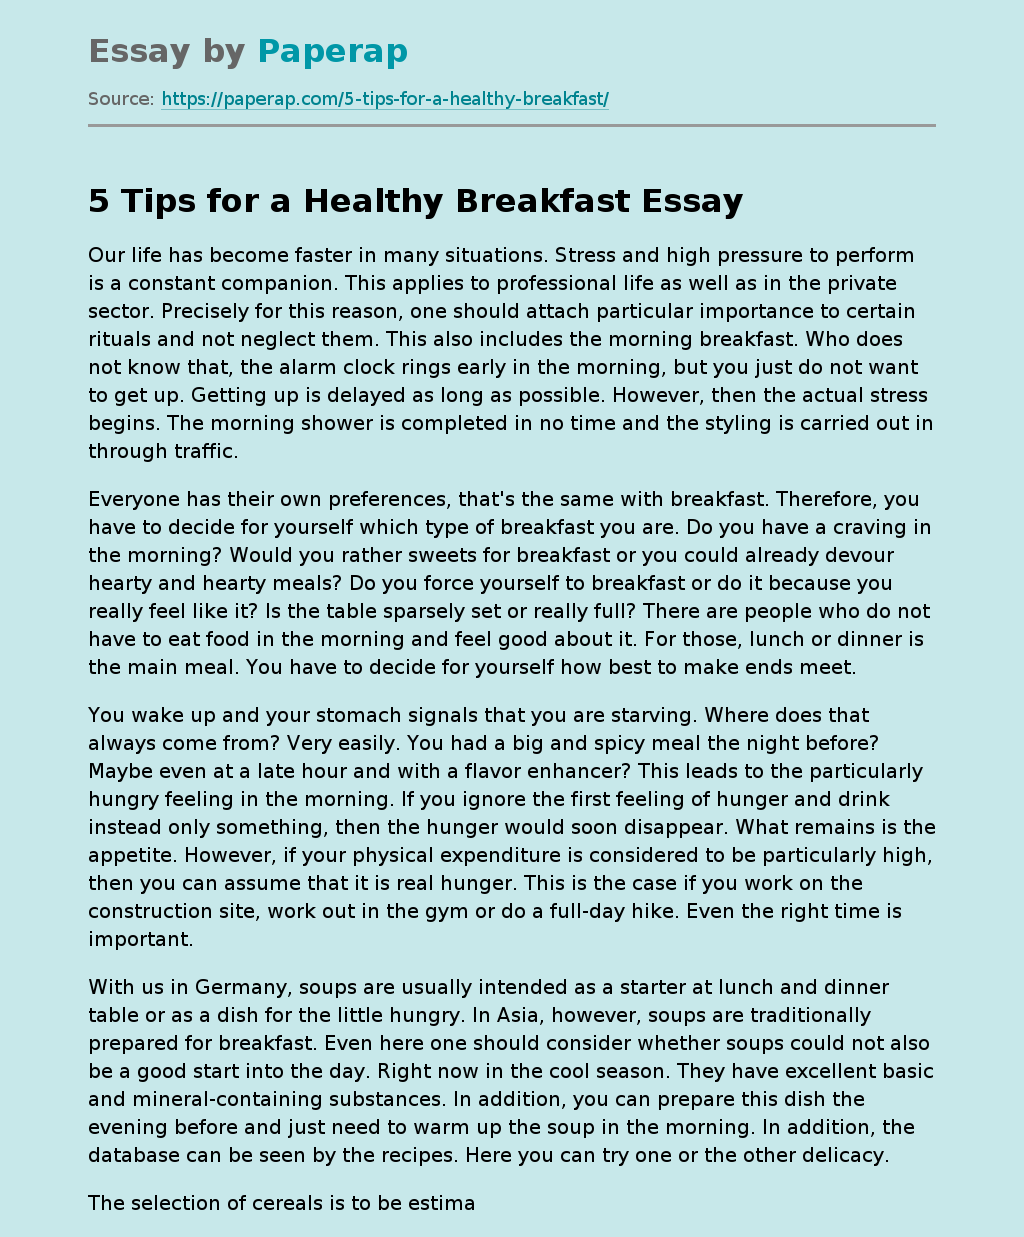 5 Tips for a Healthy Breakfast